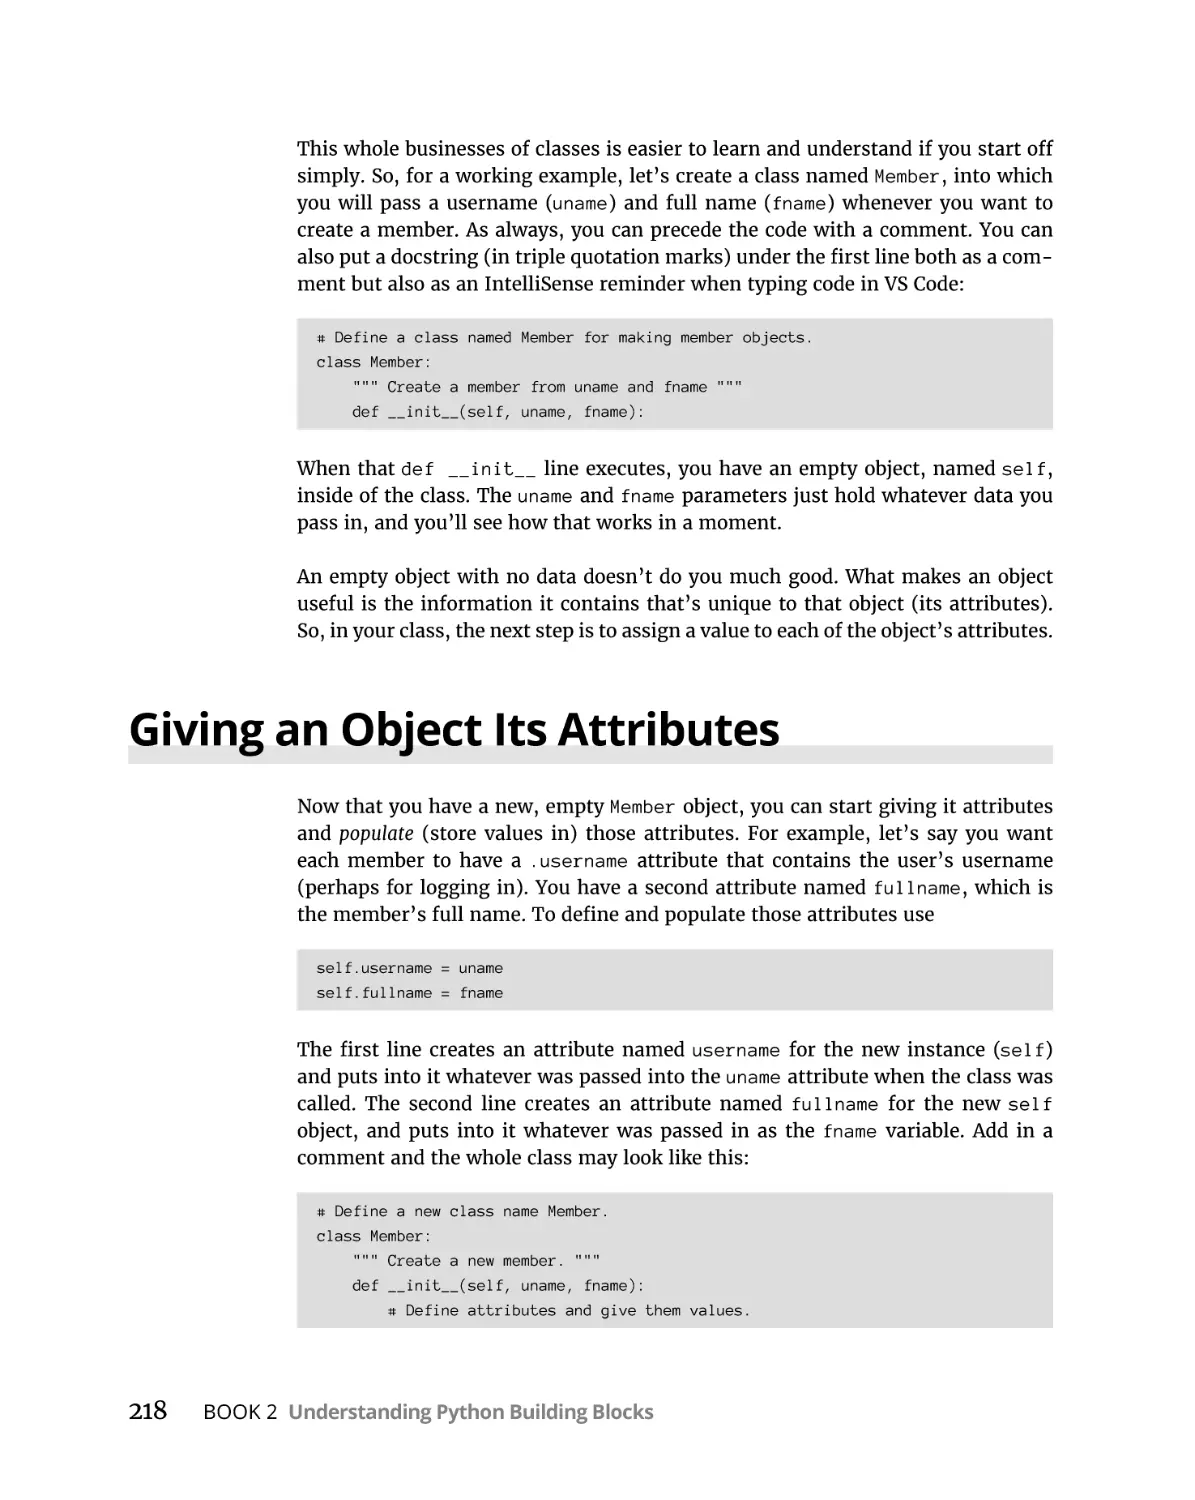 Giving an Object Its Attributes